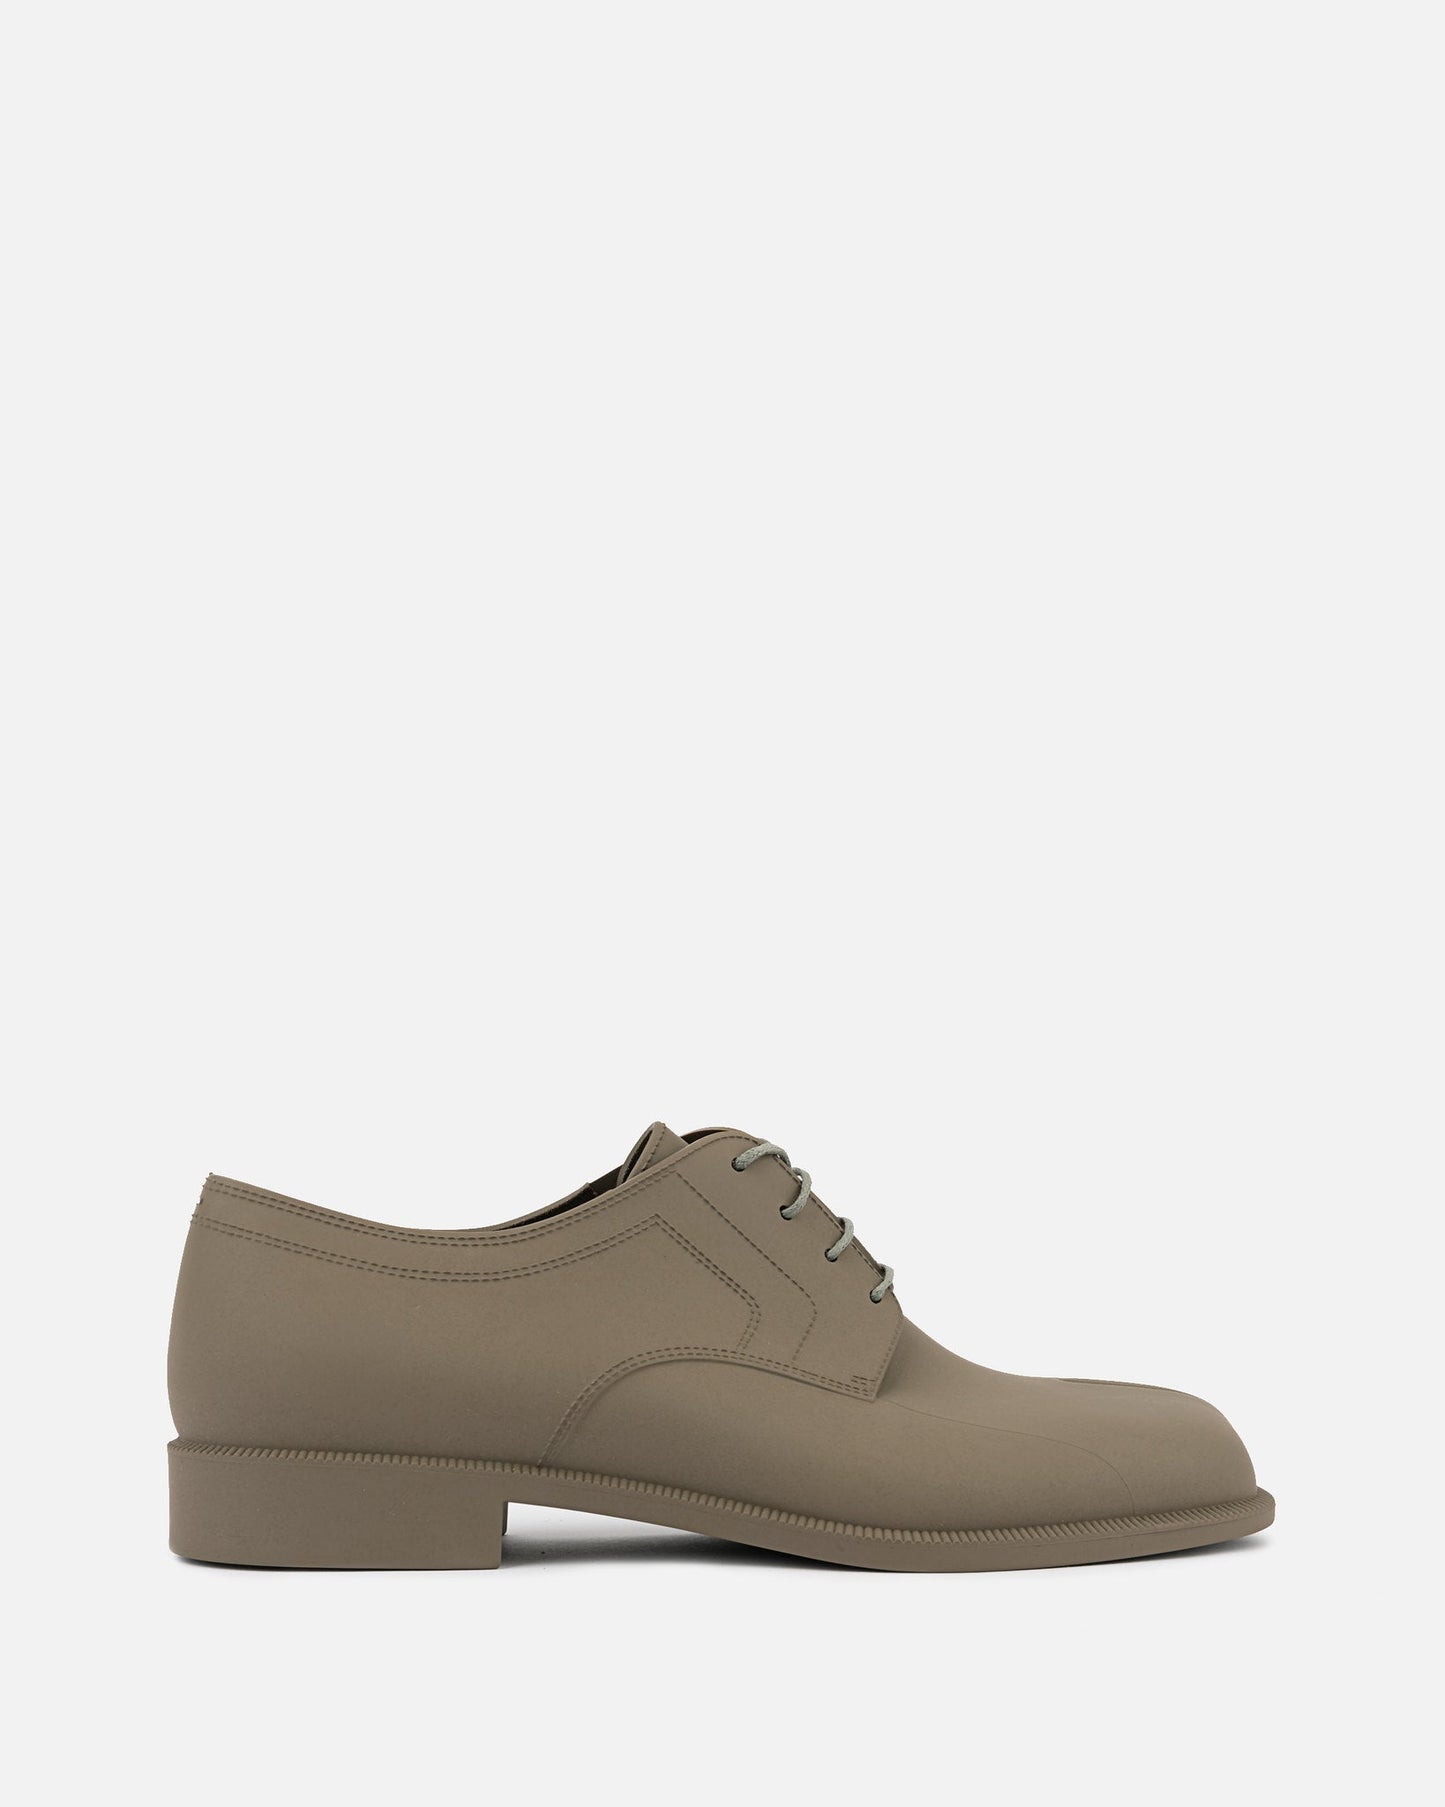 Maison Margiela Men's Shoes Tabi Lace-Up Shoes in Bungee Cord